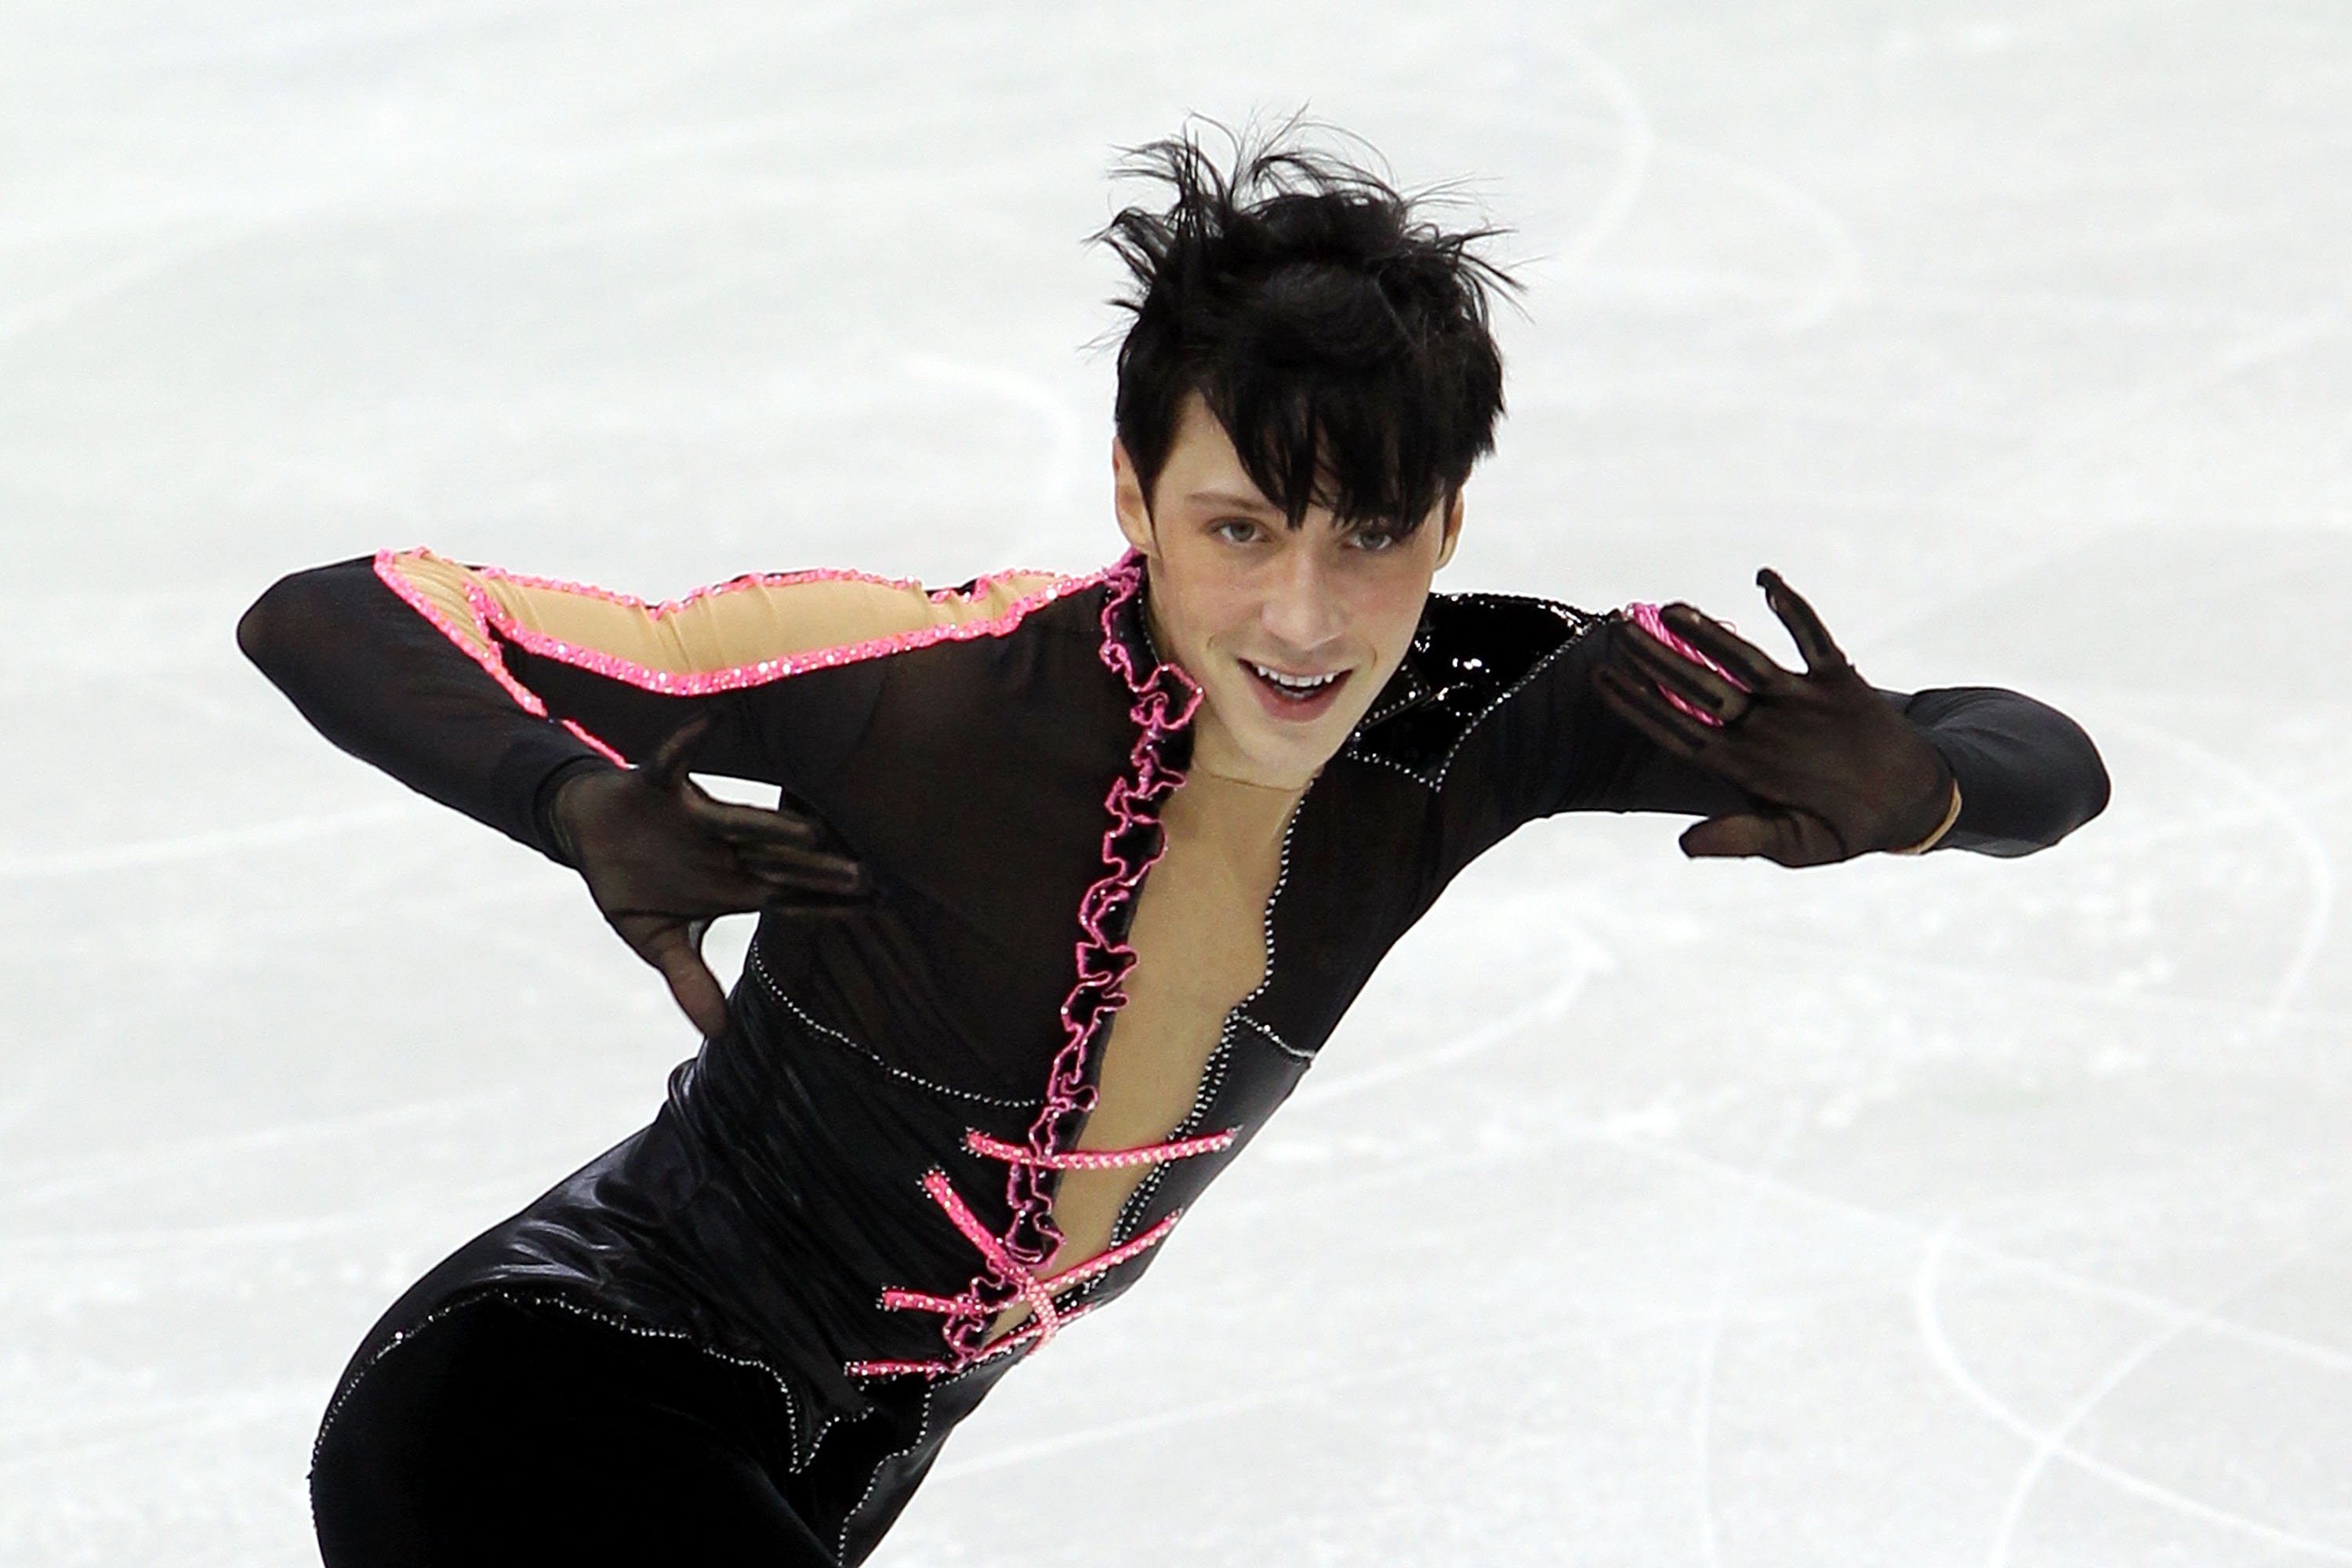 Johnny Weir of the United States competes at the Vancouver 2010 Winter Olympics at the Pacific Coliseum in Vancouver, Canada on February 16, 2010 | Source: Getty Images